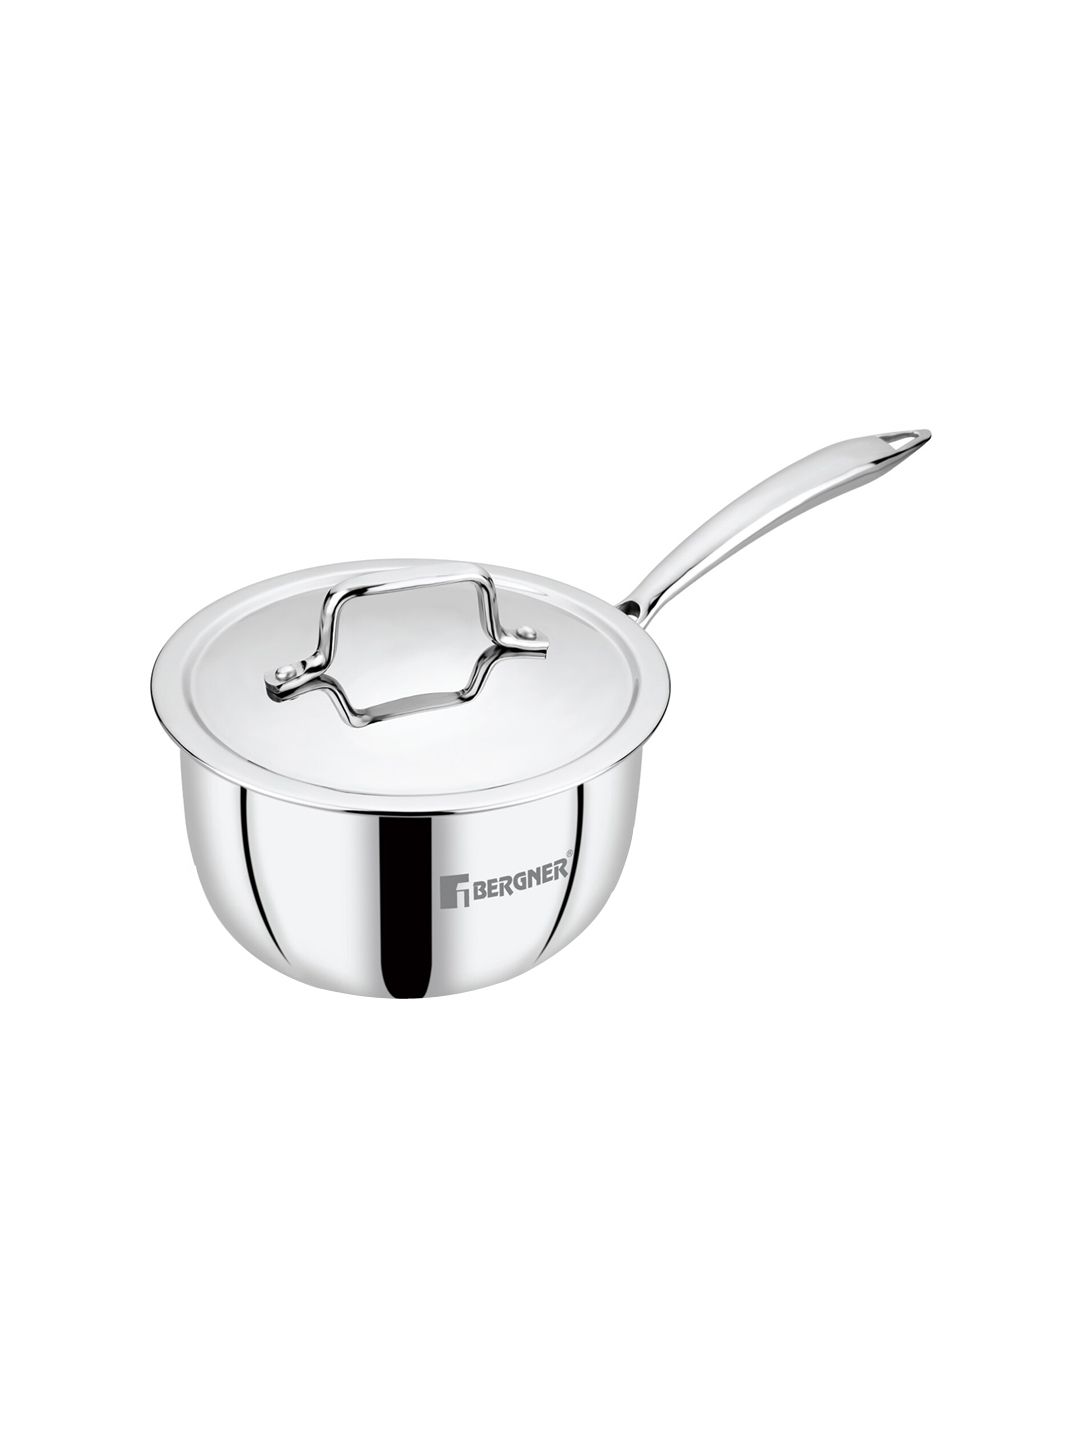 BERGNER Silver-Toned Solid Tri-Ply Stainless Steel Saucepan With Lid Price in India